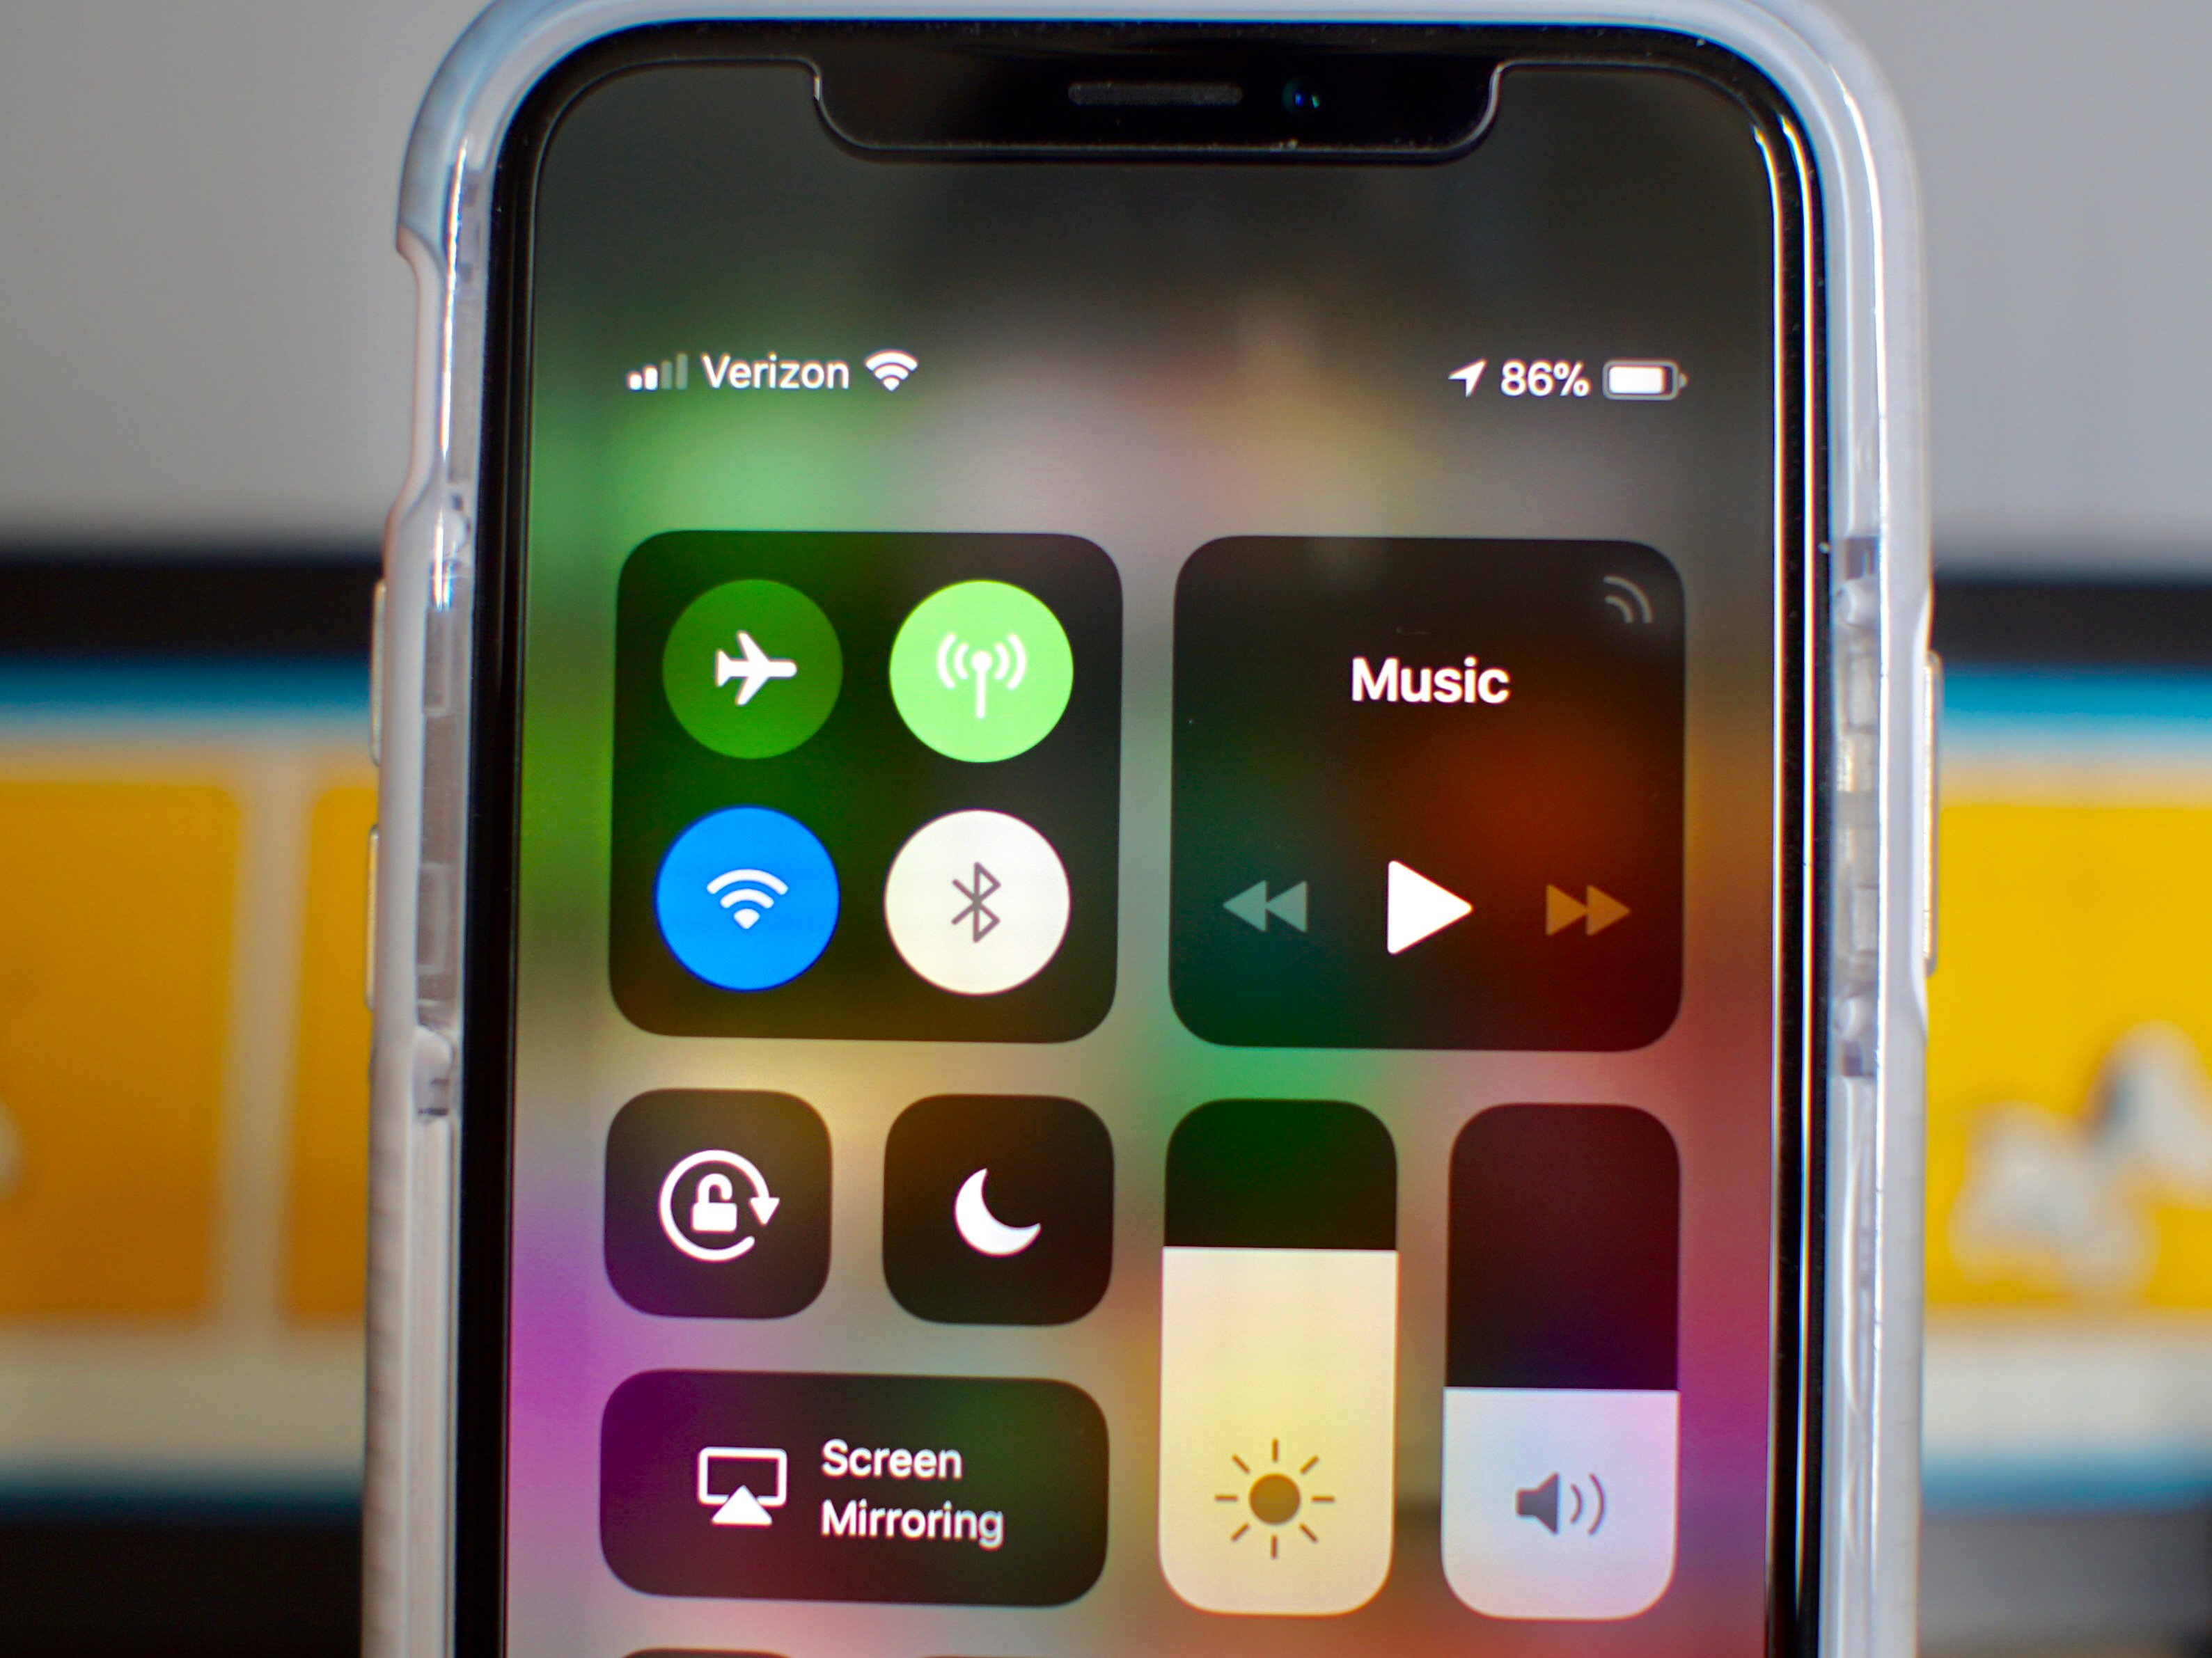 What do the Blue, Gray and Green icons mean in Control Center?